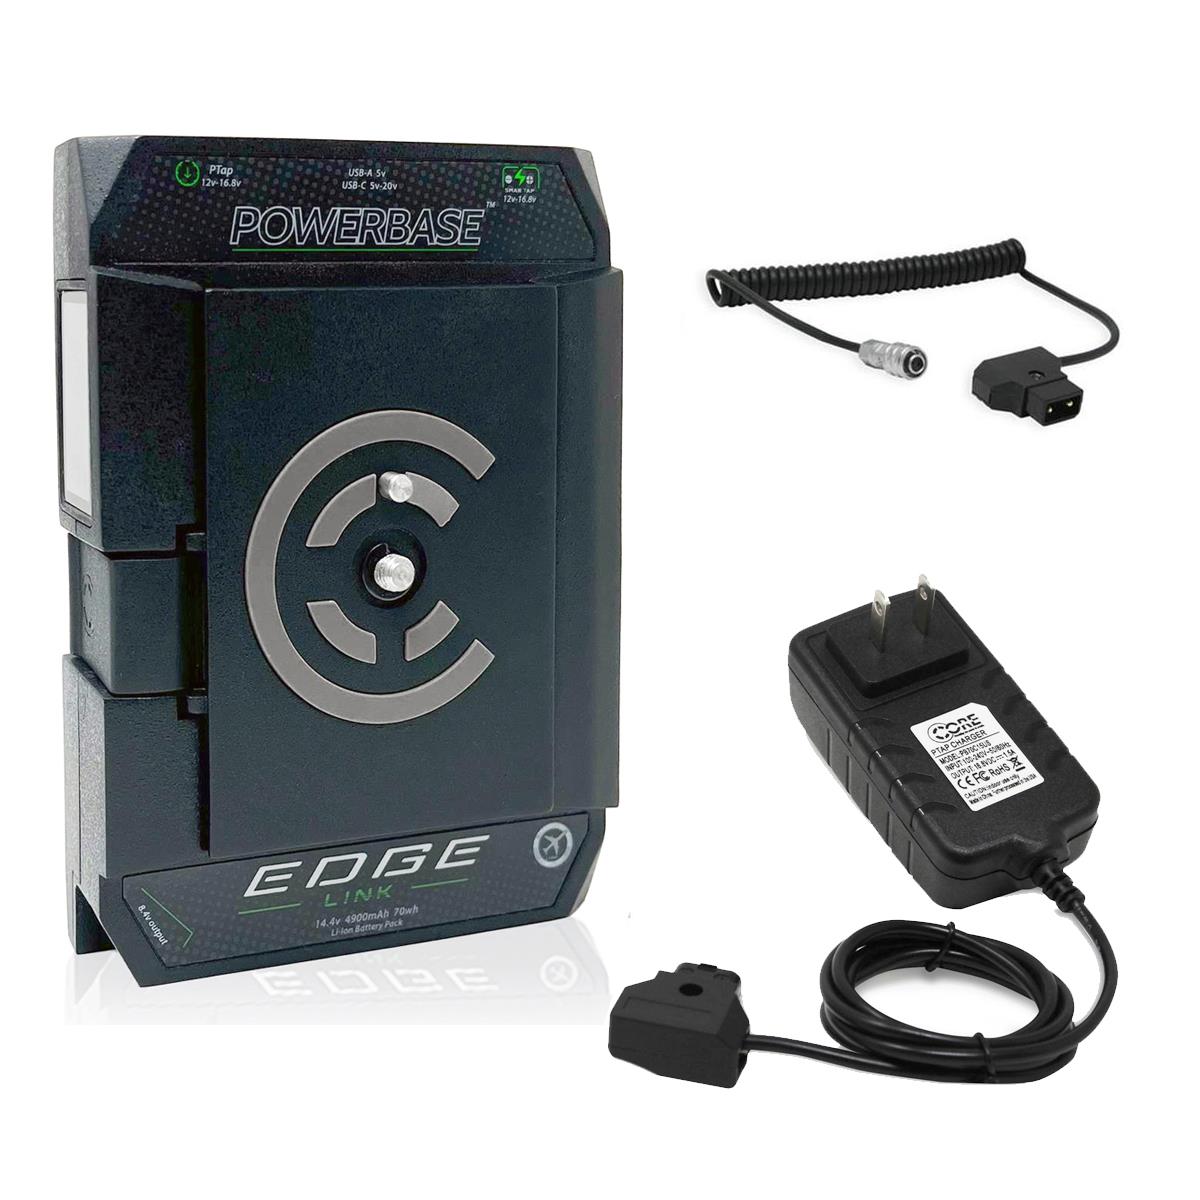 Core SWX PowerBase Edge Link 70Wh Battery (V-Mount) w/Charger, Blackmagic Cable -  PBE-LINK B